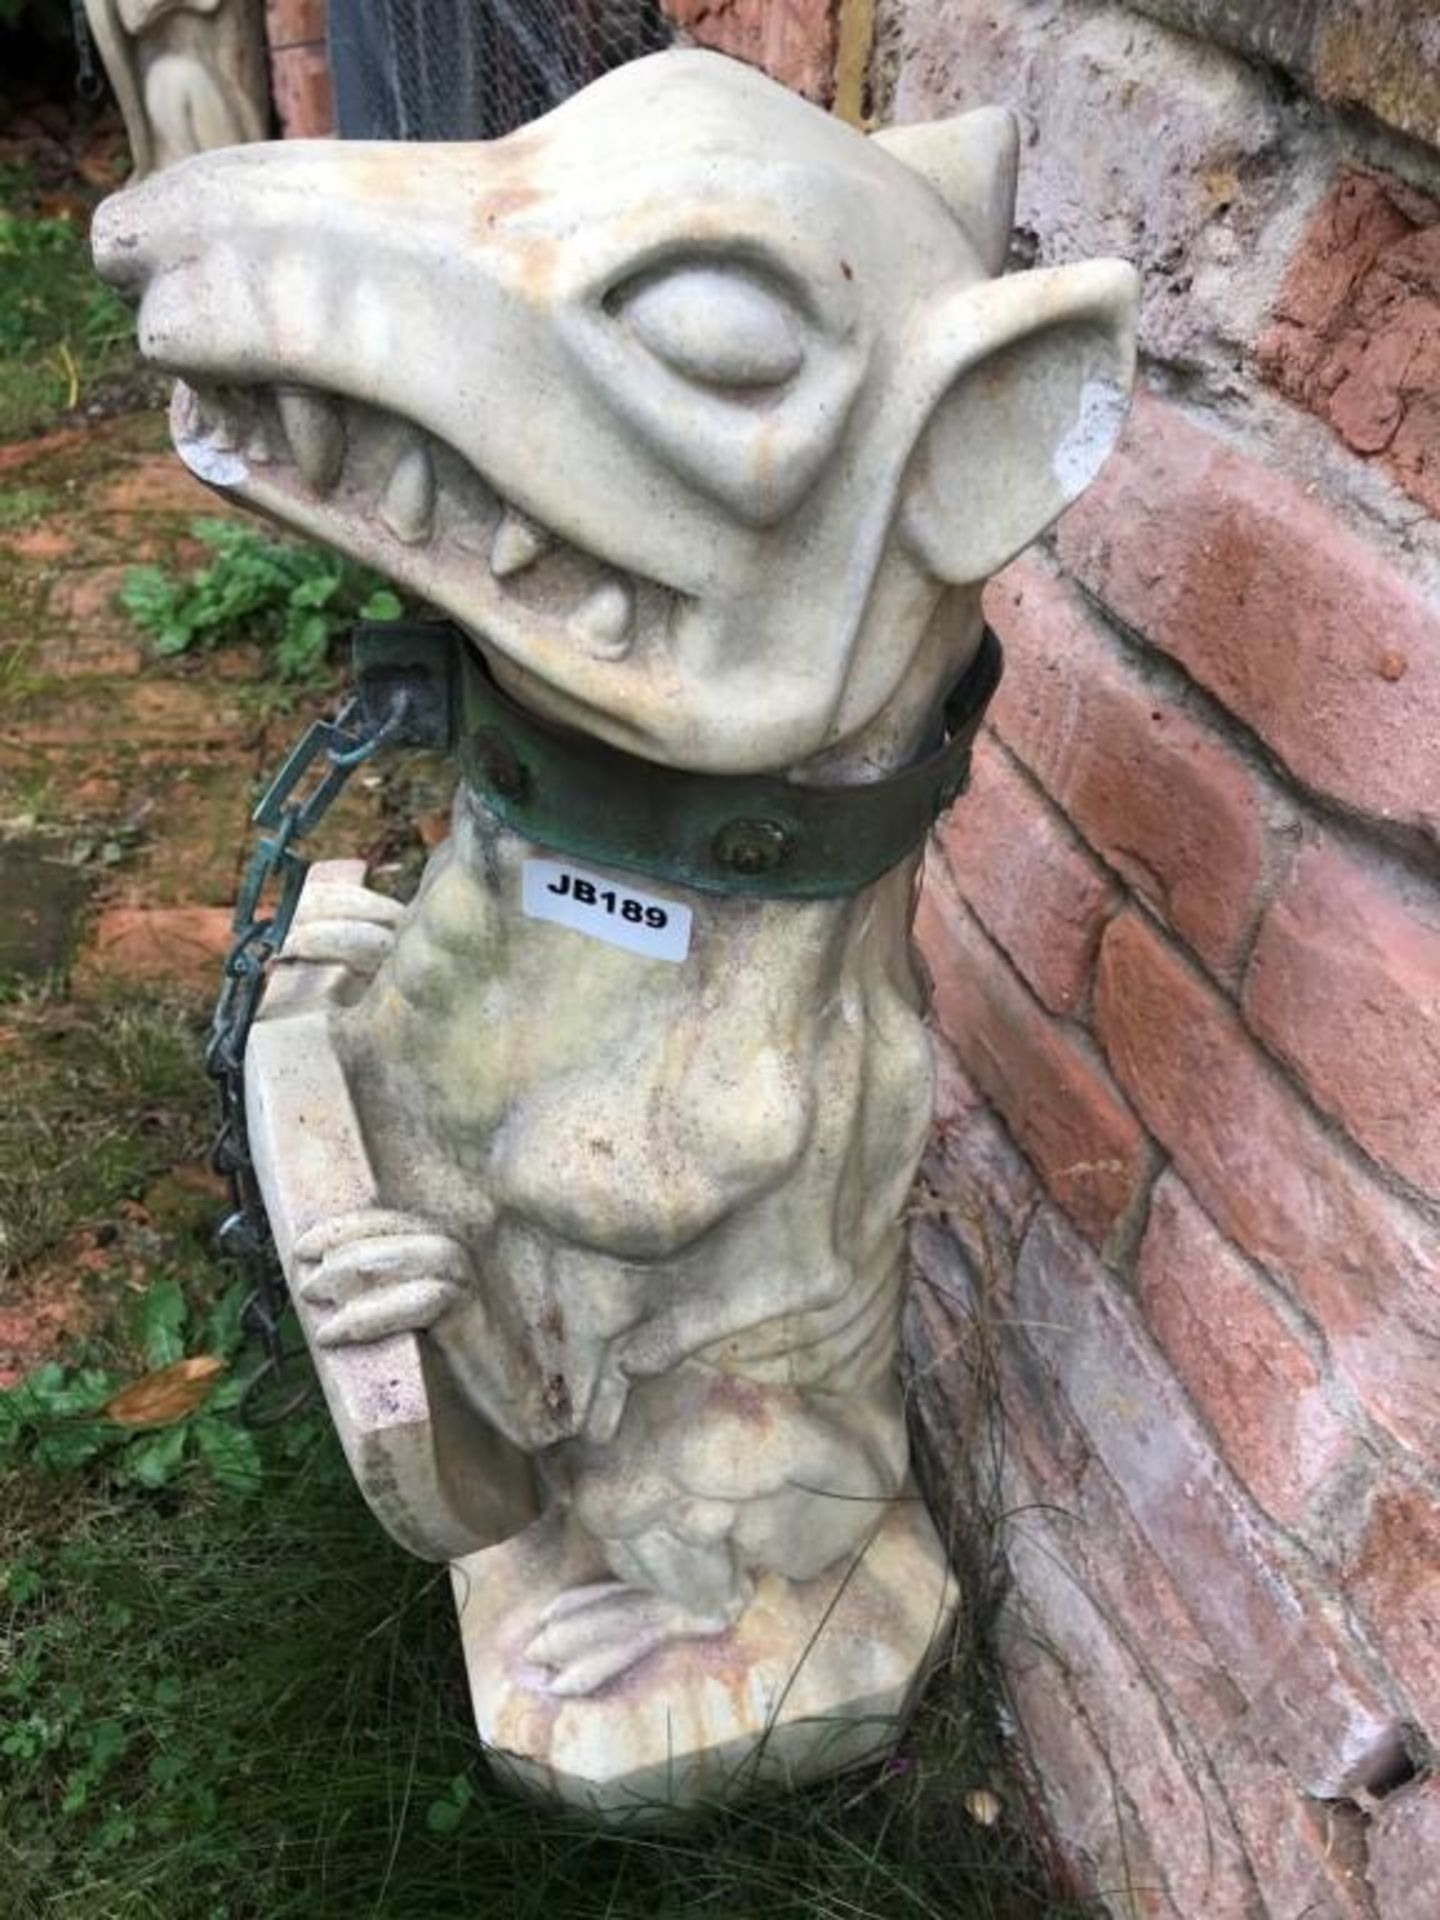 1 x Tall Gothic Style Guard Dog Statue Holding Shield with Metal Dog Colllar and Chain Lead - Measur